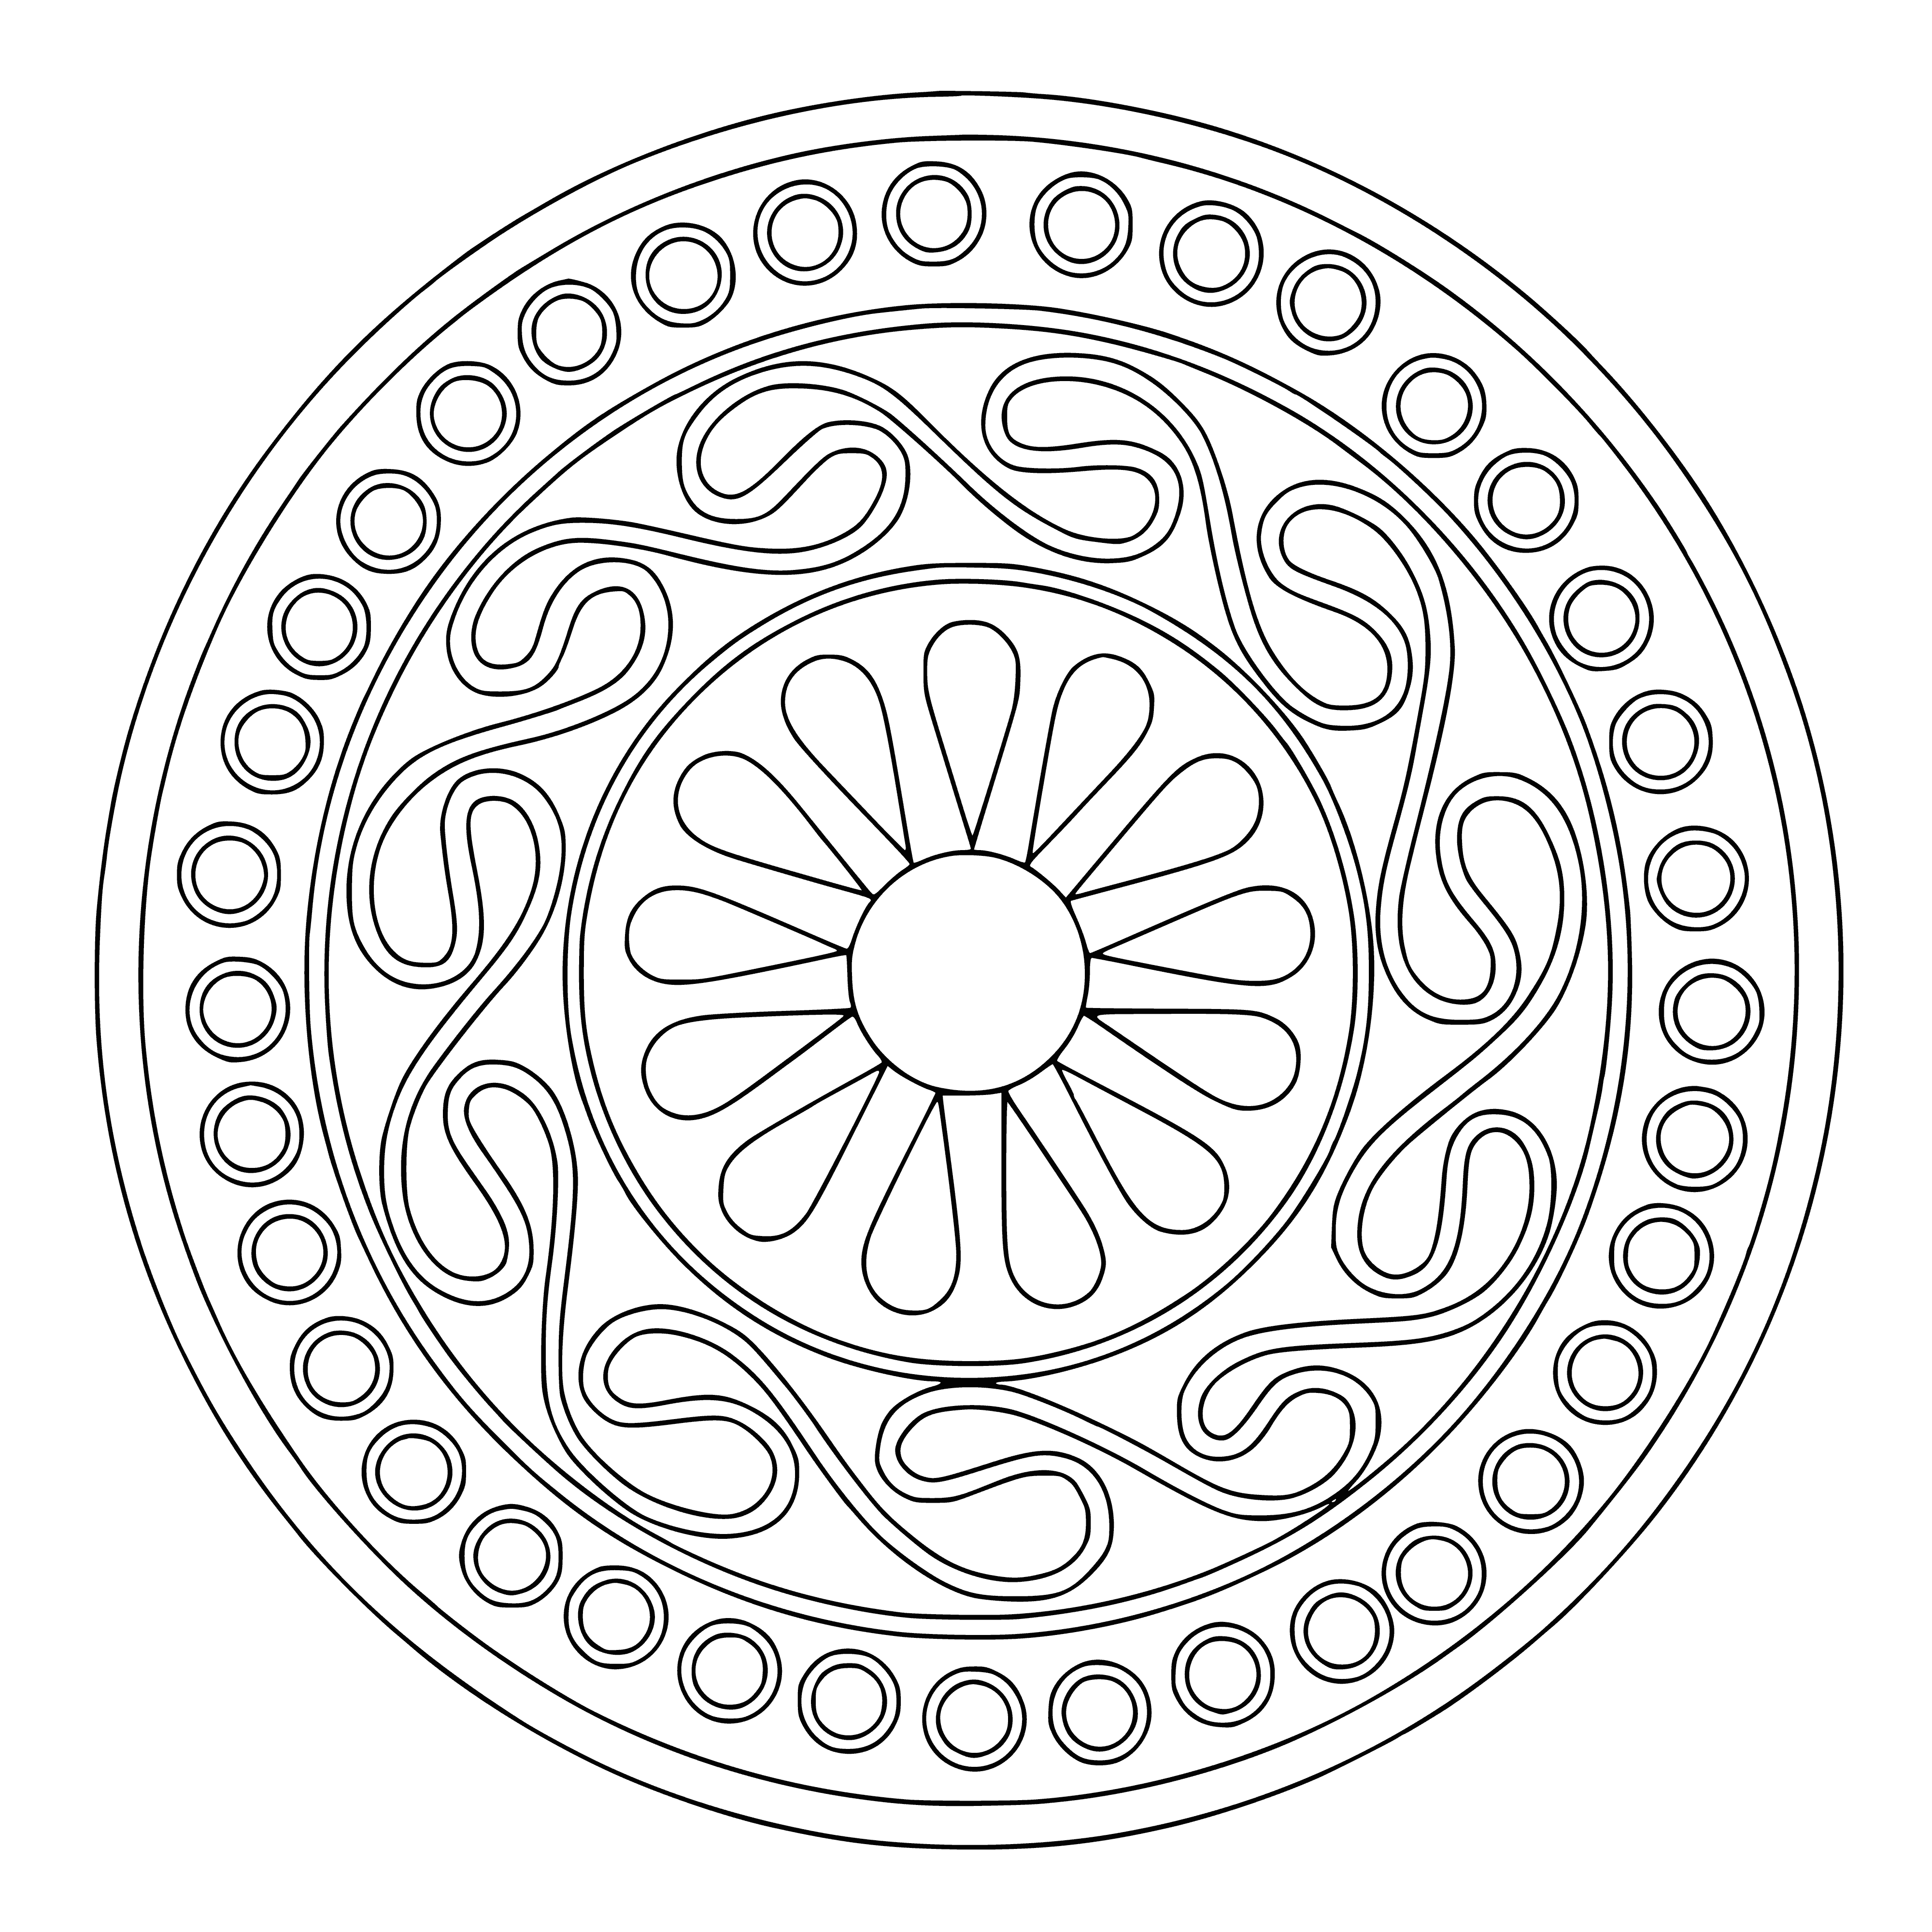 coloring page: Beautiful mandala coloring page features intricate patterns, geometric and organic shapes, and a variety of colors -- a design perfect for coloring and relaxing.